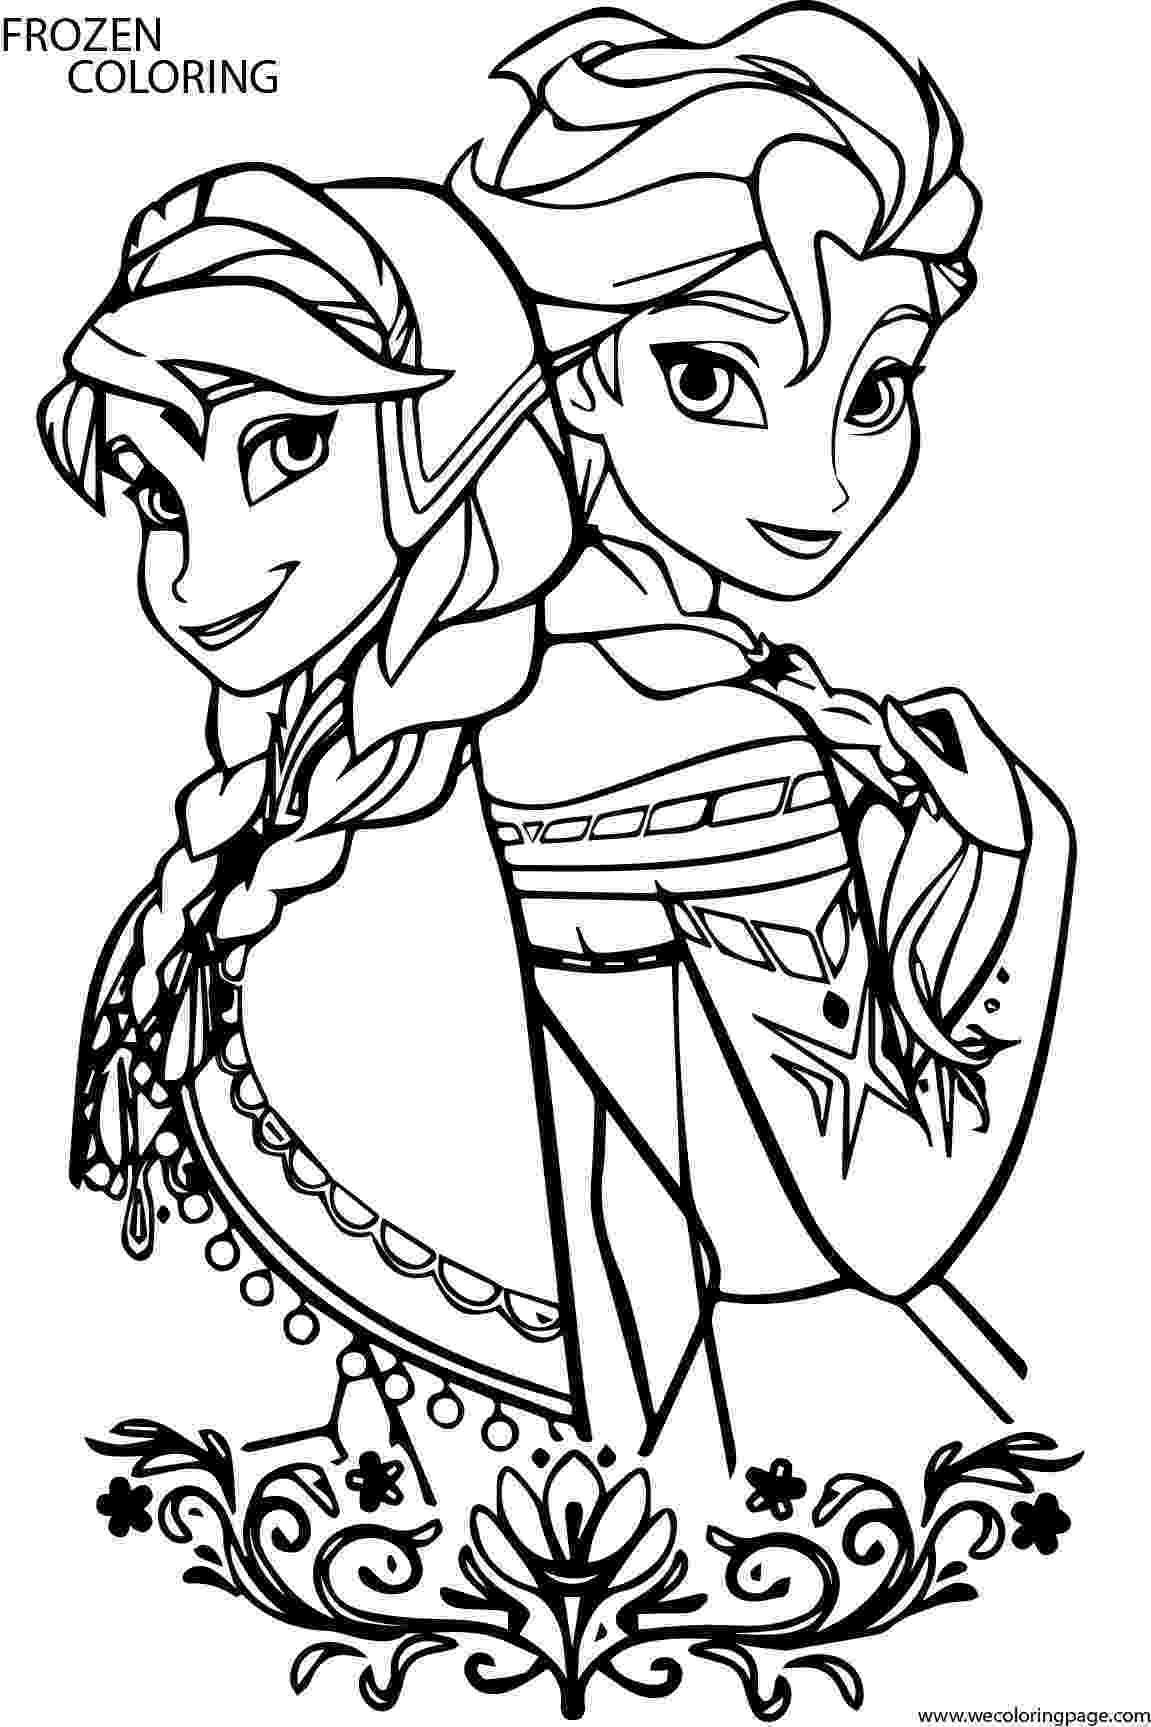 print frozen coloring pages free printable frozen coloring pages for kids best print coloring pages frozen 